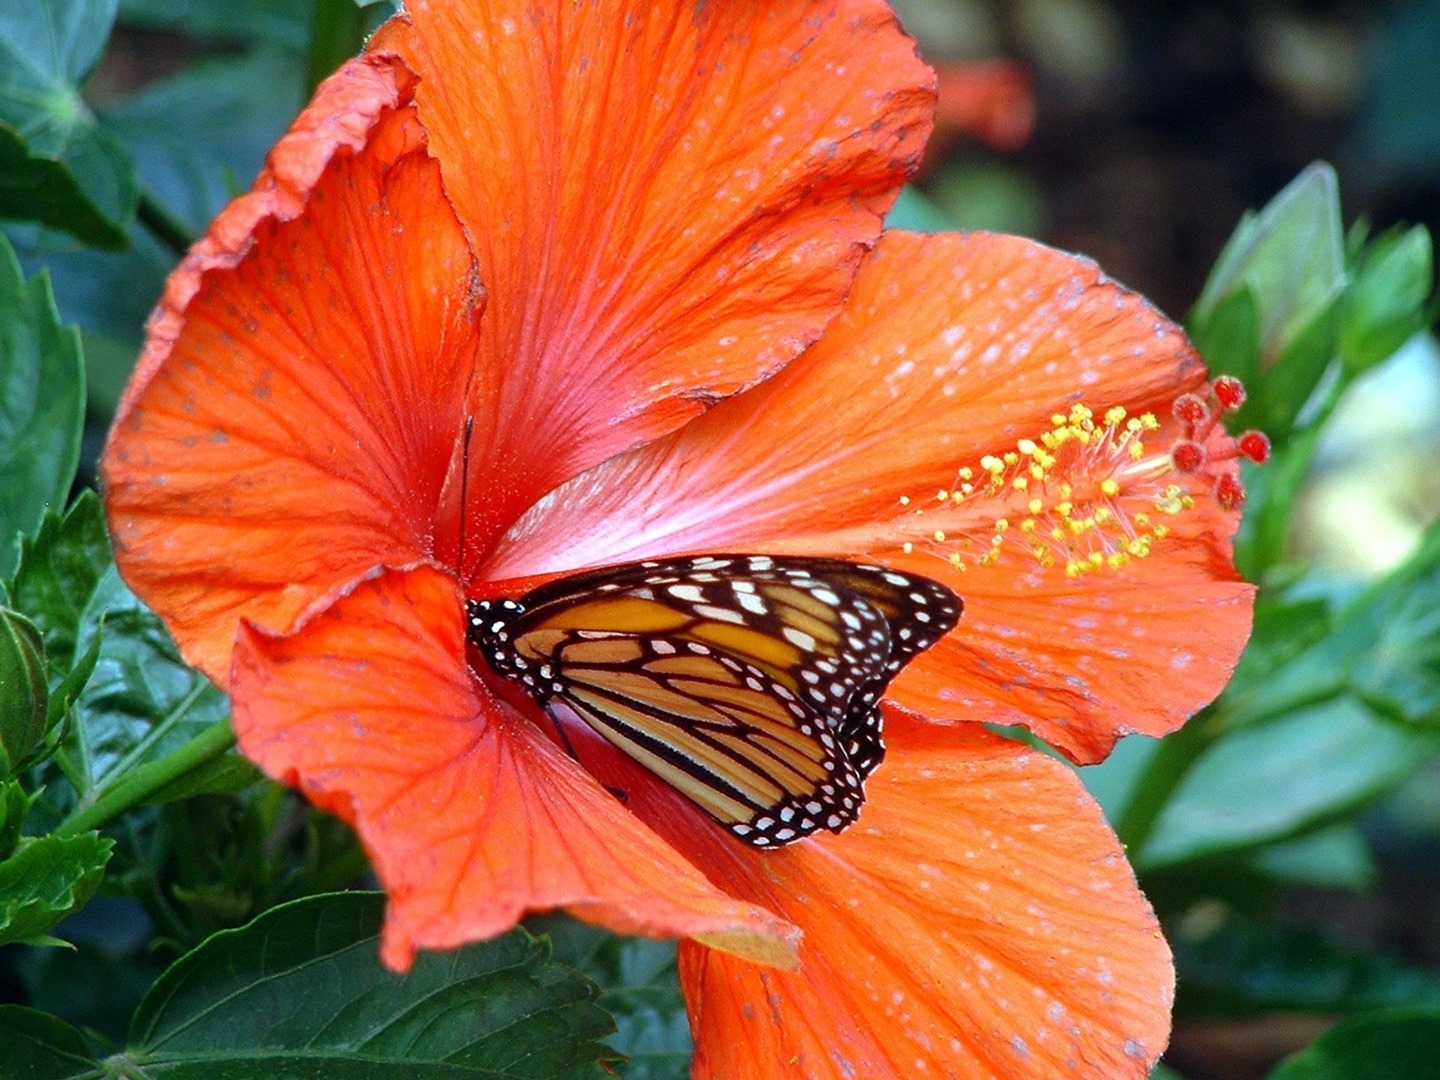 Head to Victoria Ward Park on April 3rd from 1P to 4PM to learn about the monarch butterfly.  We’ll be joined by experts who will talk with garden visitors about how you can support the conservation efforts. There are fun surprises planned as well including photo opportunities, giveaways for the keiki and a special appearance by Oahu Kindness Rocks. Save the date!